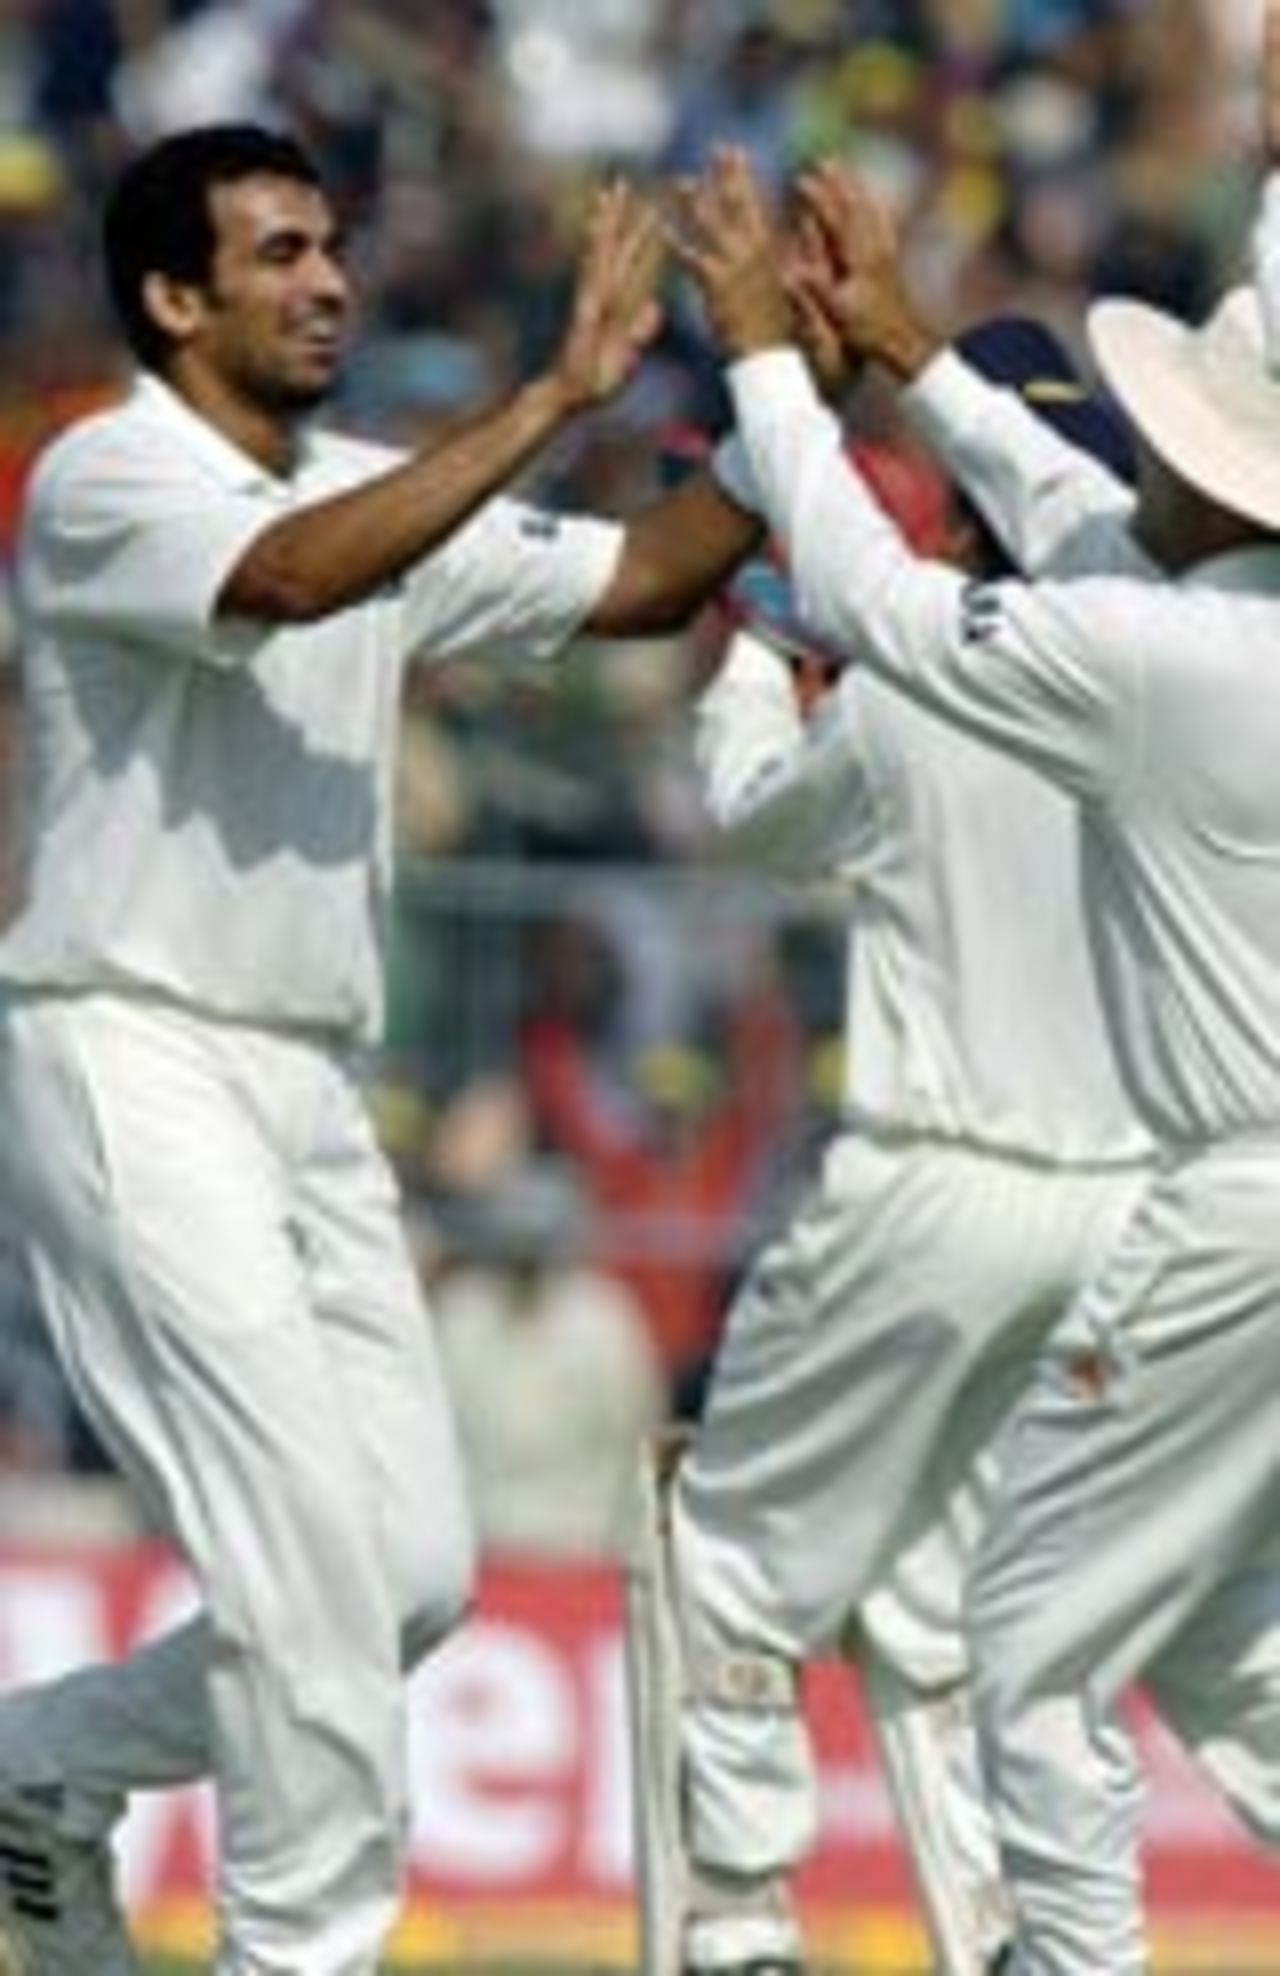 Zaheer Khan celebrates after an early wicket, India v South Africa, 2nd Test, Kolkata, 1st day, November 28, 2004